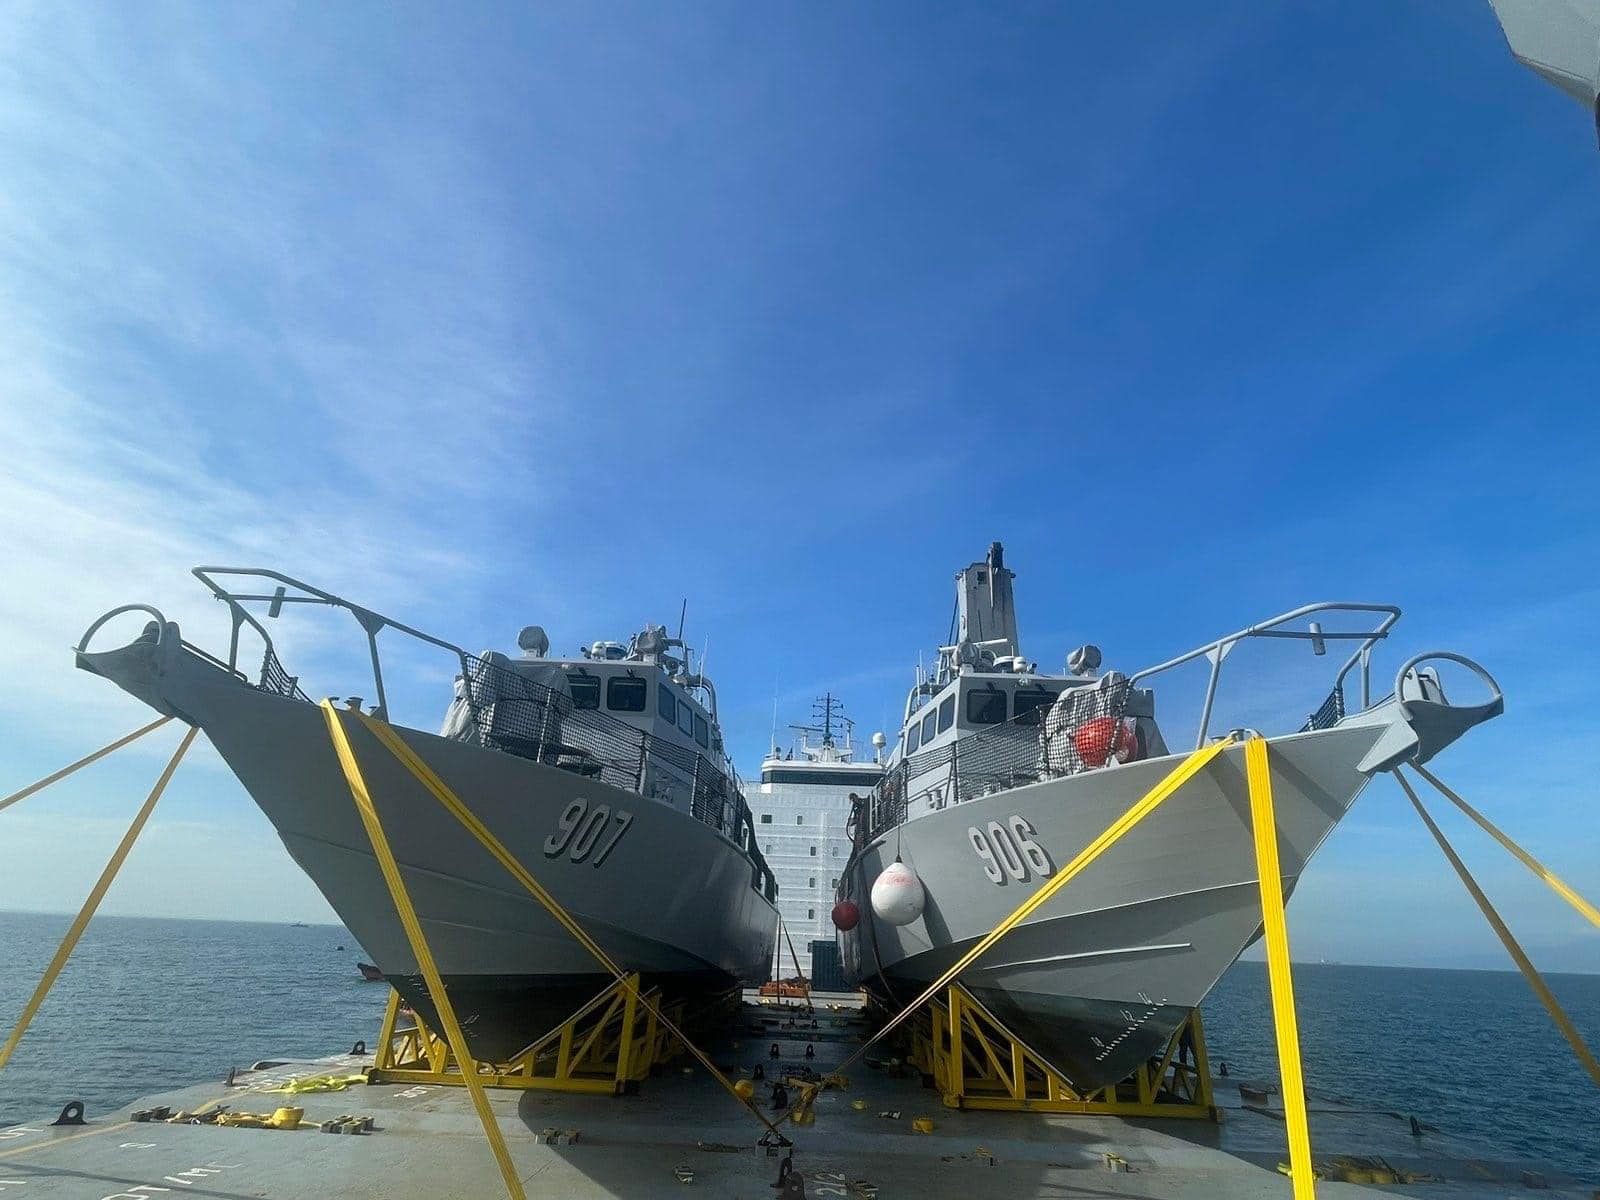 Fast-attack interdiction crafts (FAIC) PG-906 and PG-907 are seen docked in a port, both with two yellow ropes from the ground each tied over their hulls. Their names are painted in white on the side of their bodies. The blue sky acts as a background, with the port's blue-green water peeking on the lower back of the image.